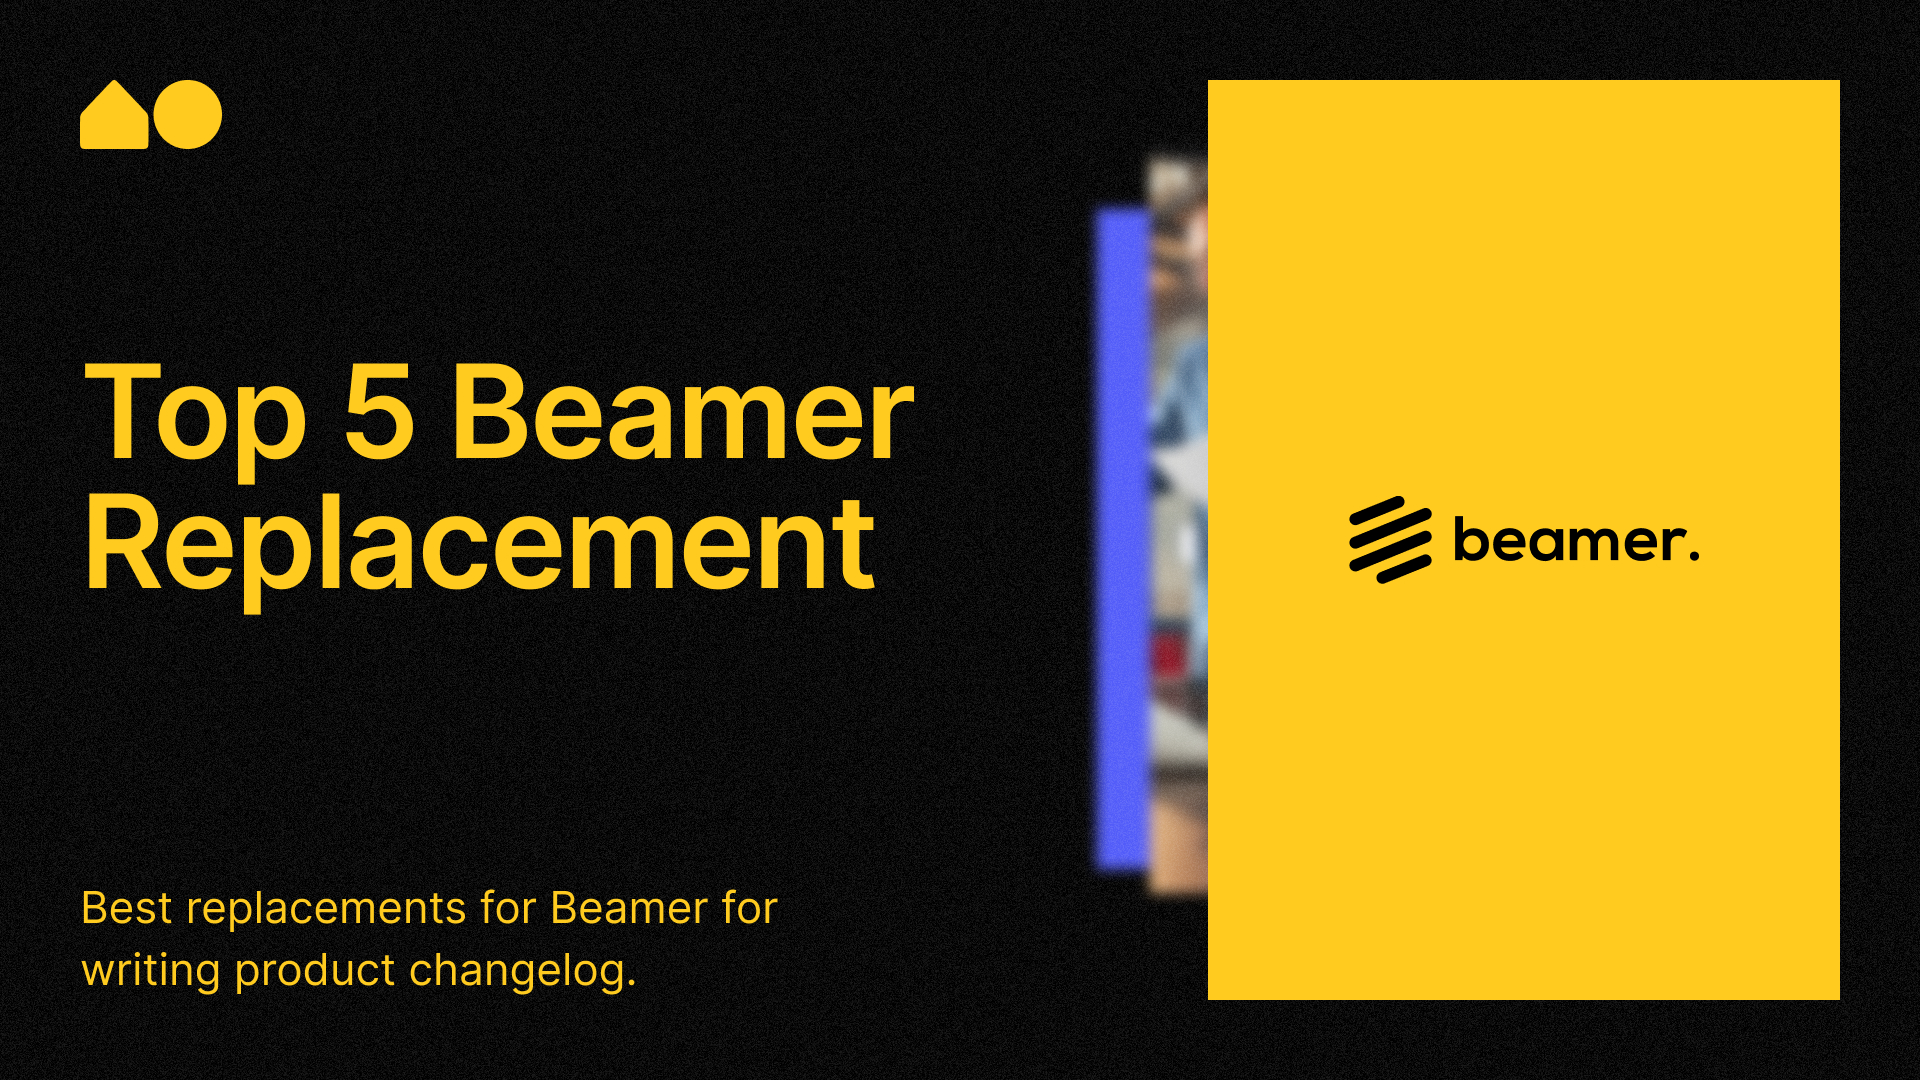 Top 5 Beamer Alternative & Replacement Tools for Changelogs